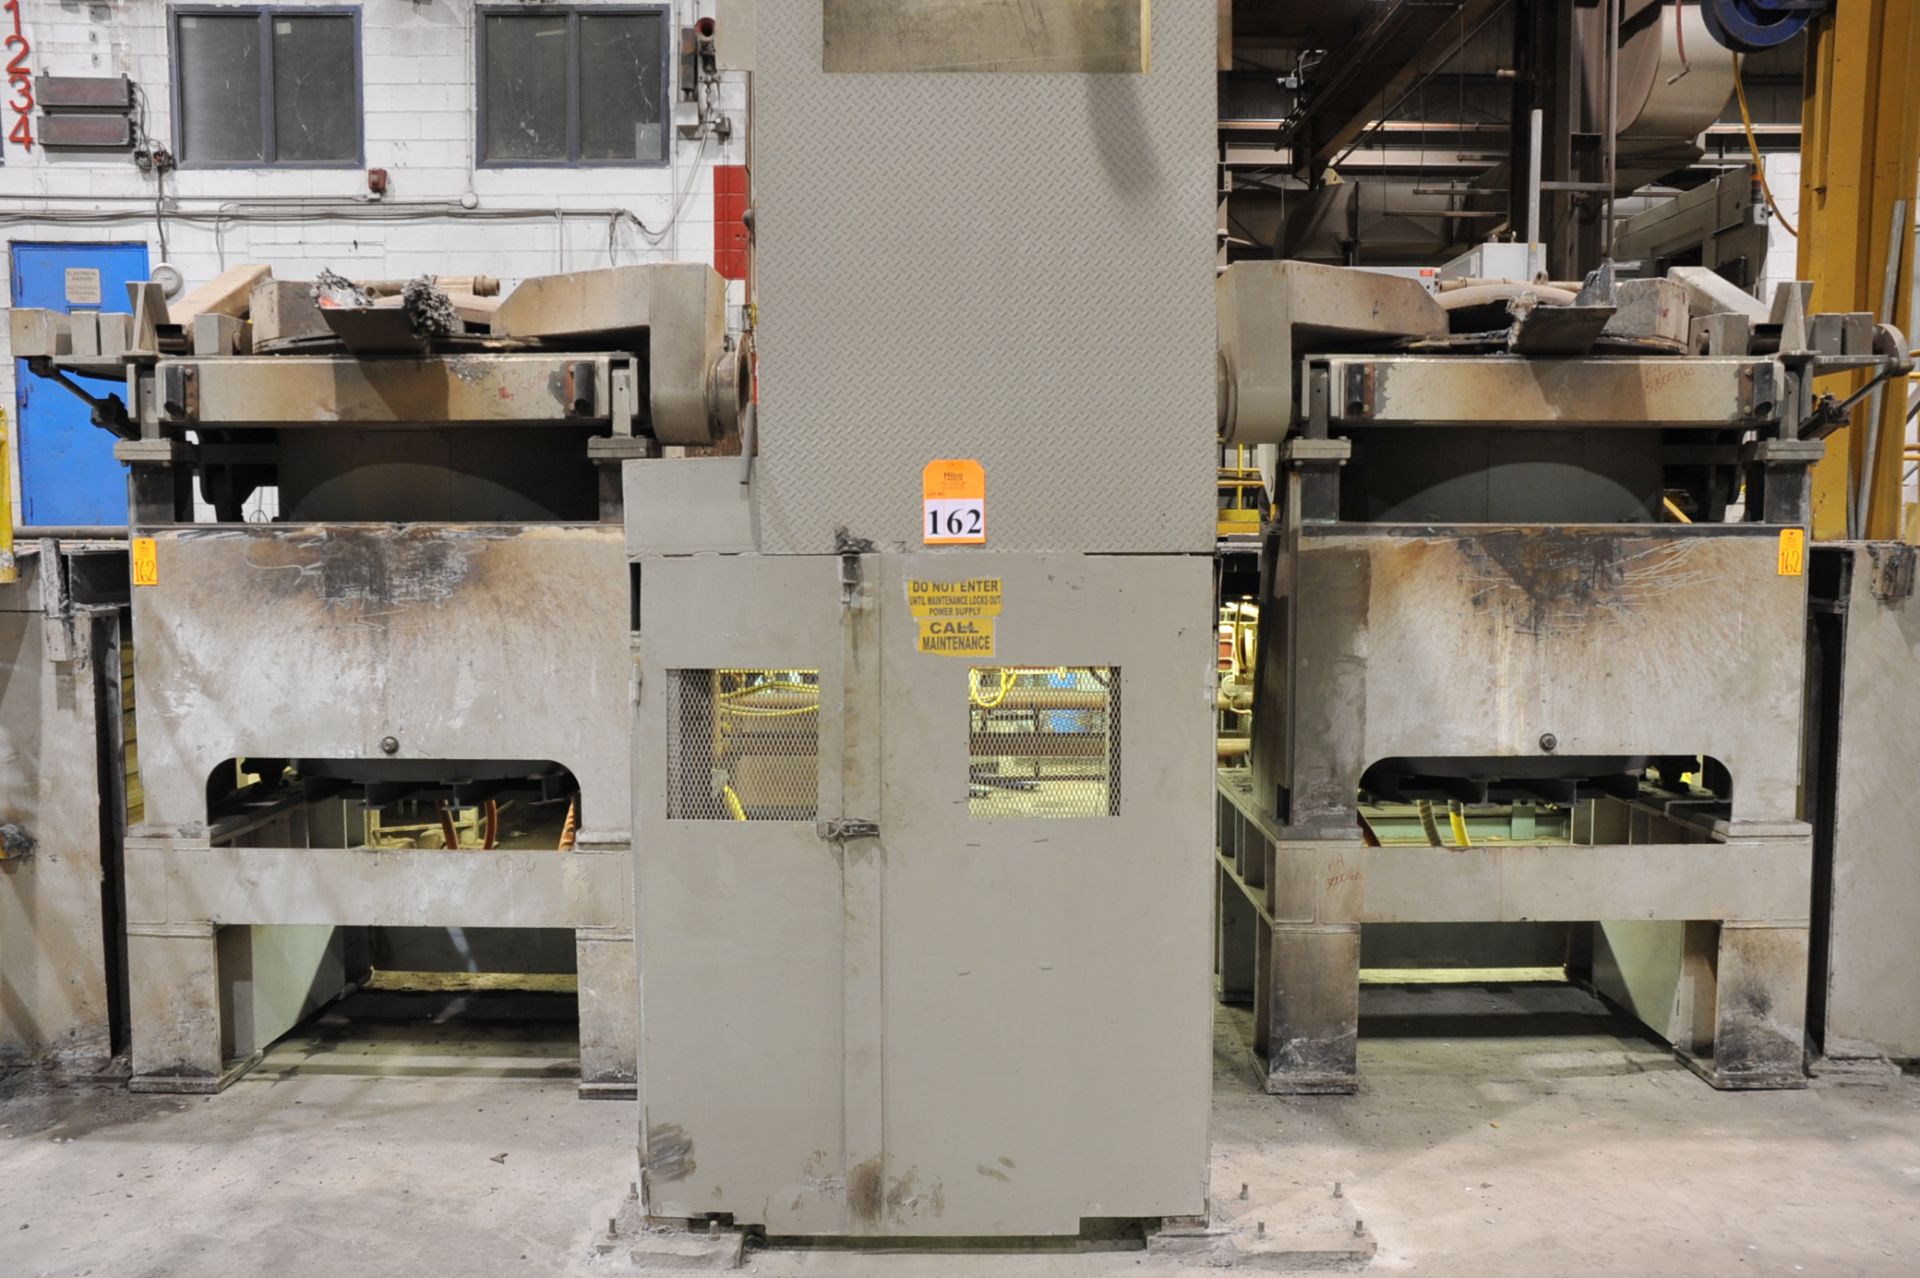 Ajax Tocco Model MFS-3 3 Ton Capacity Induction Melting Furnaces; Serial Number: M-14782-G2/G1 (